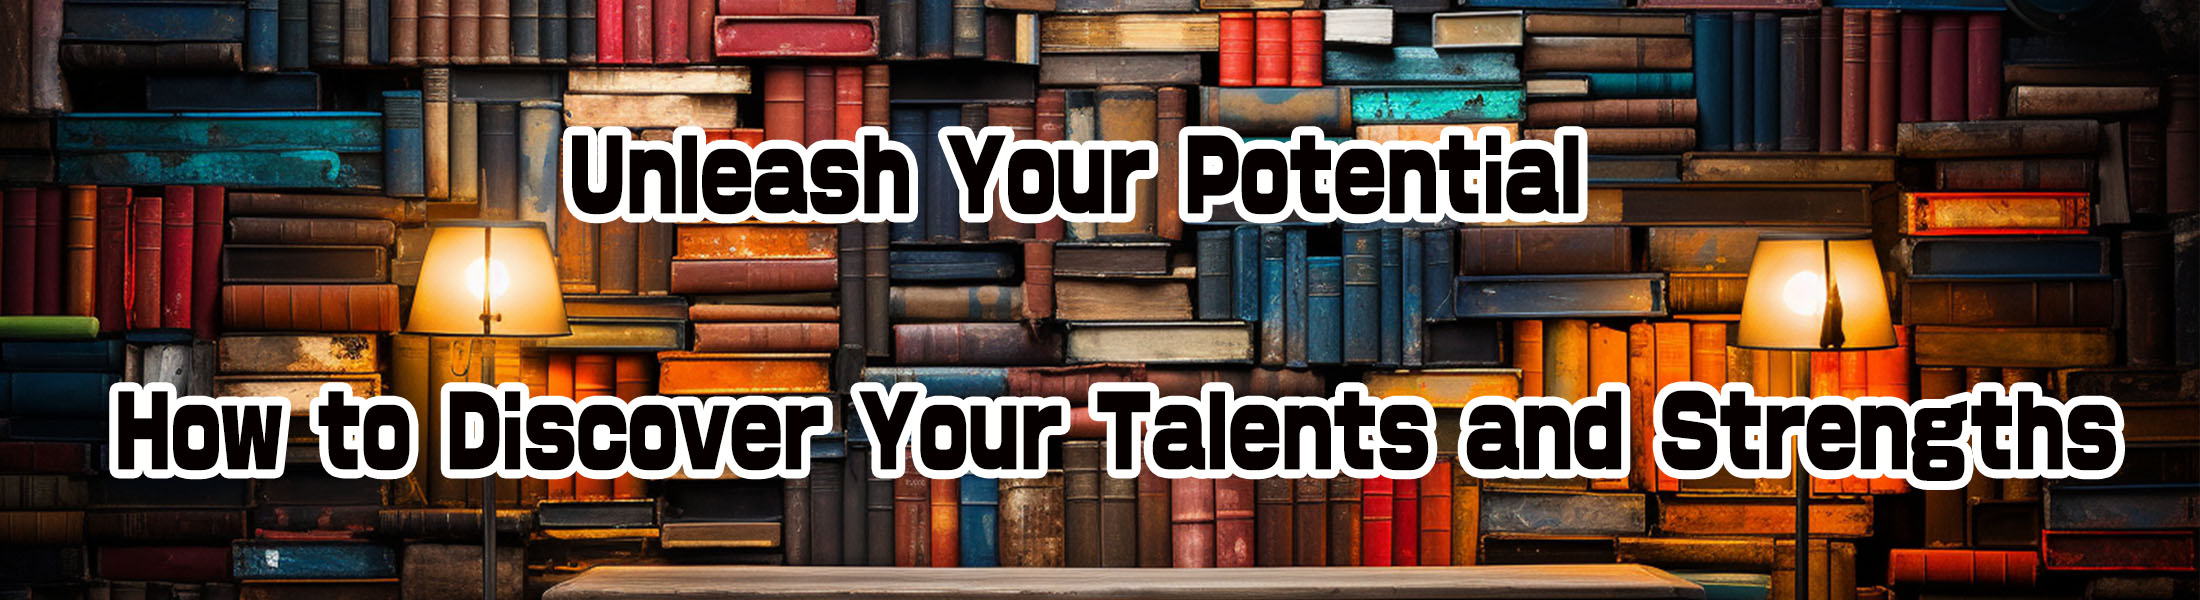 Unleash Your Potential: How to Discover Your Talents and Strengths